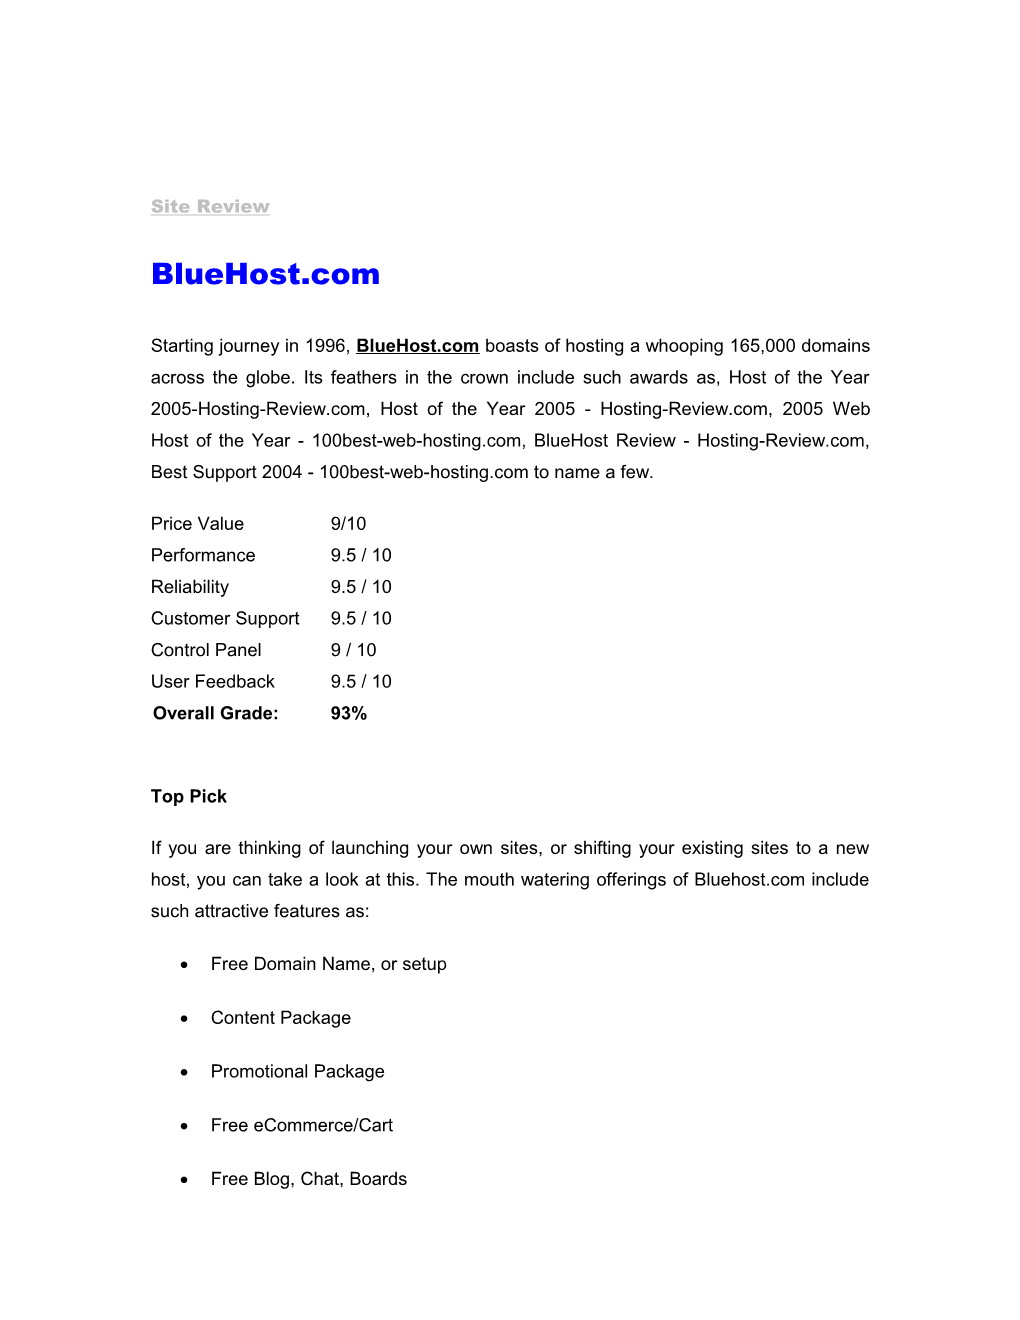 Starting It S Journey in 1996, Bluehost